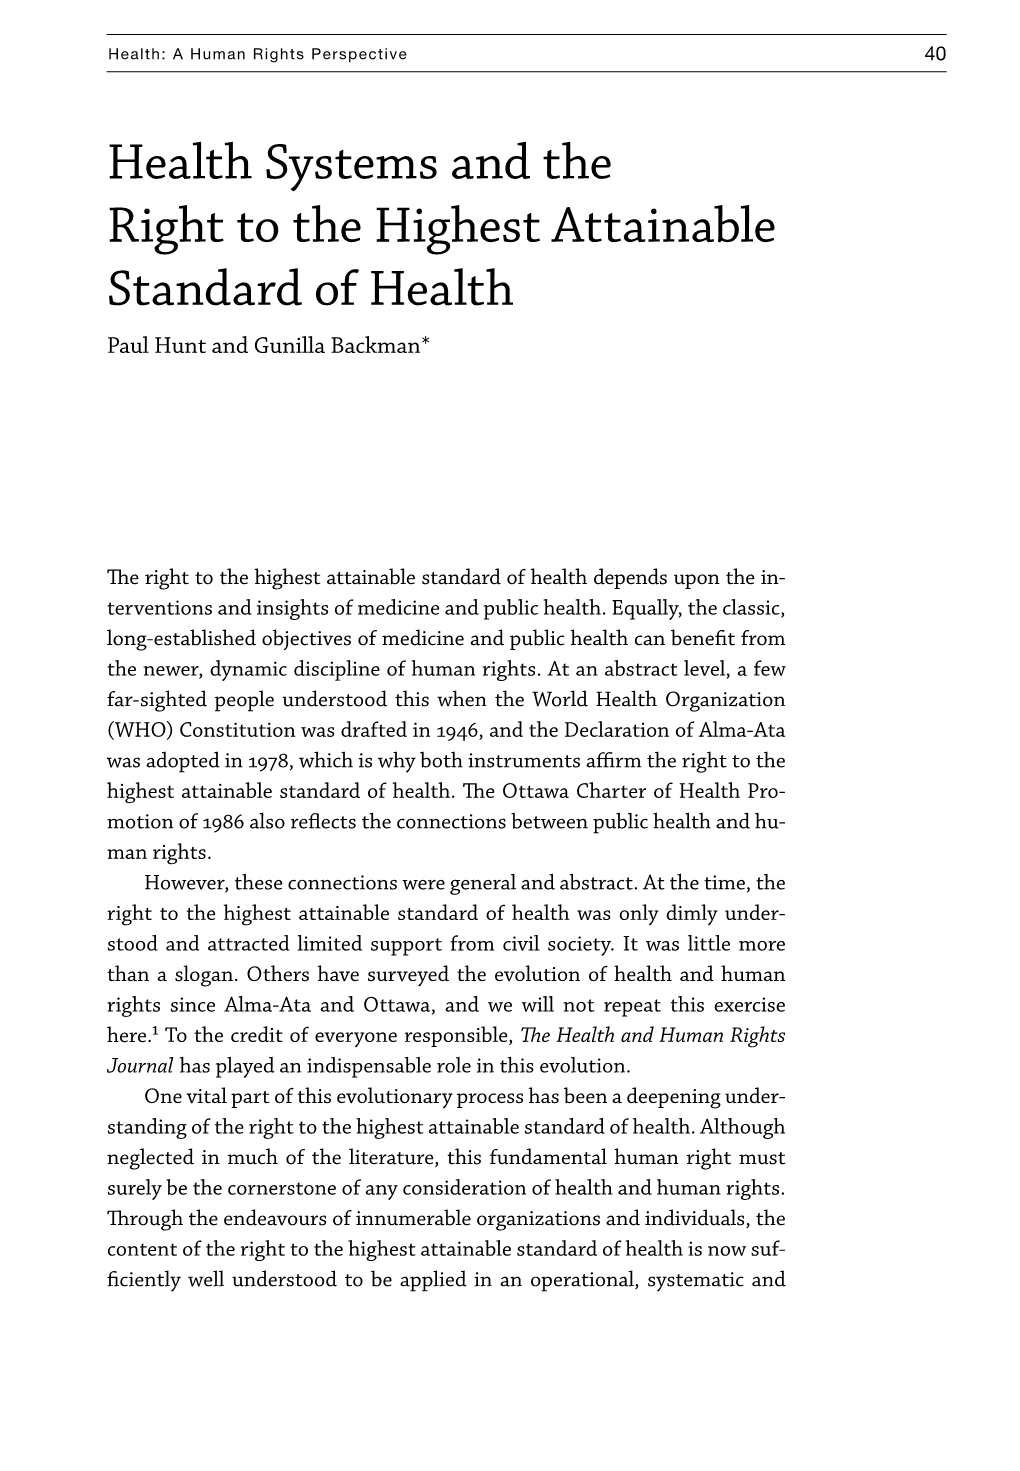 Health Systems and the Right to the Highest Attainable Standard of Health Paul Hunt and Gunilla Backman*